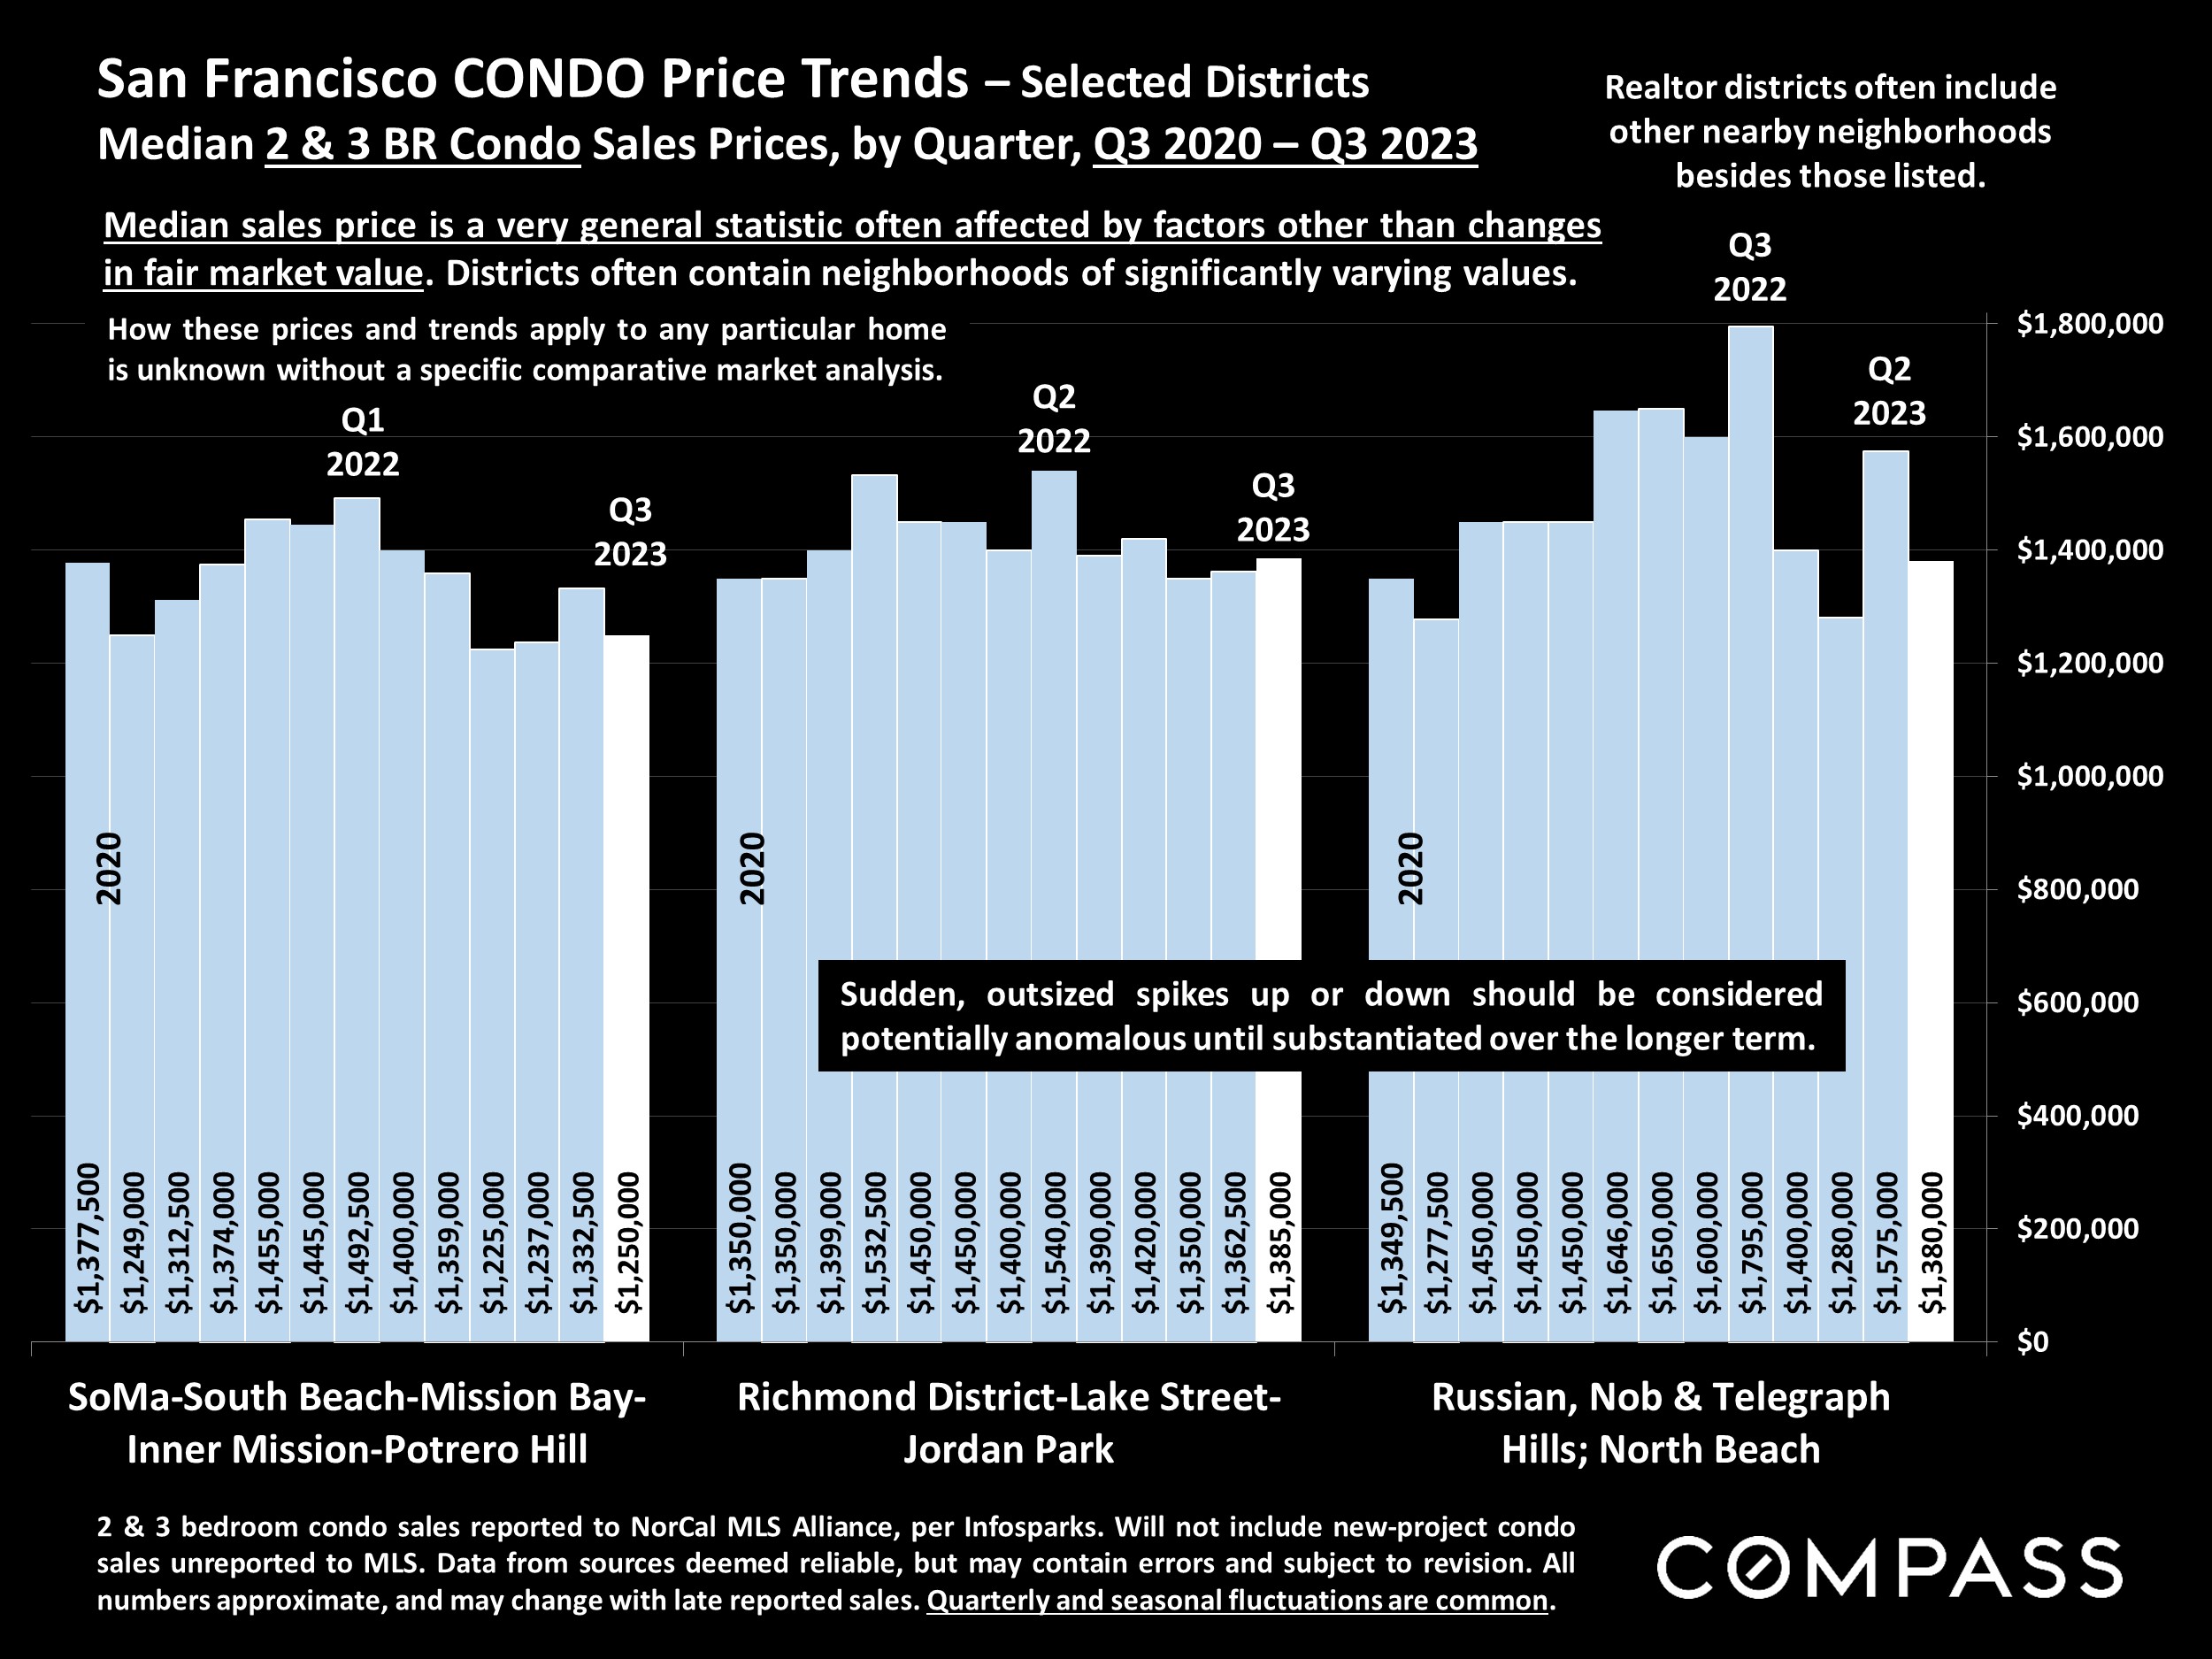 San Francisco CONDO Price Trends - Selected Districts Median 2 & 3 BR Condo Sales Prices, by Quarter, Q3 2020 - Q3 2023